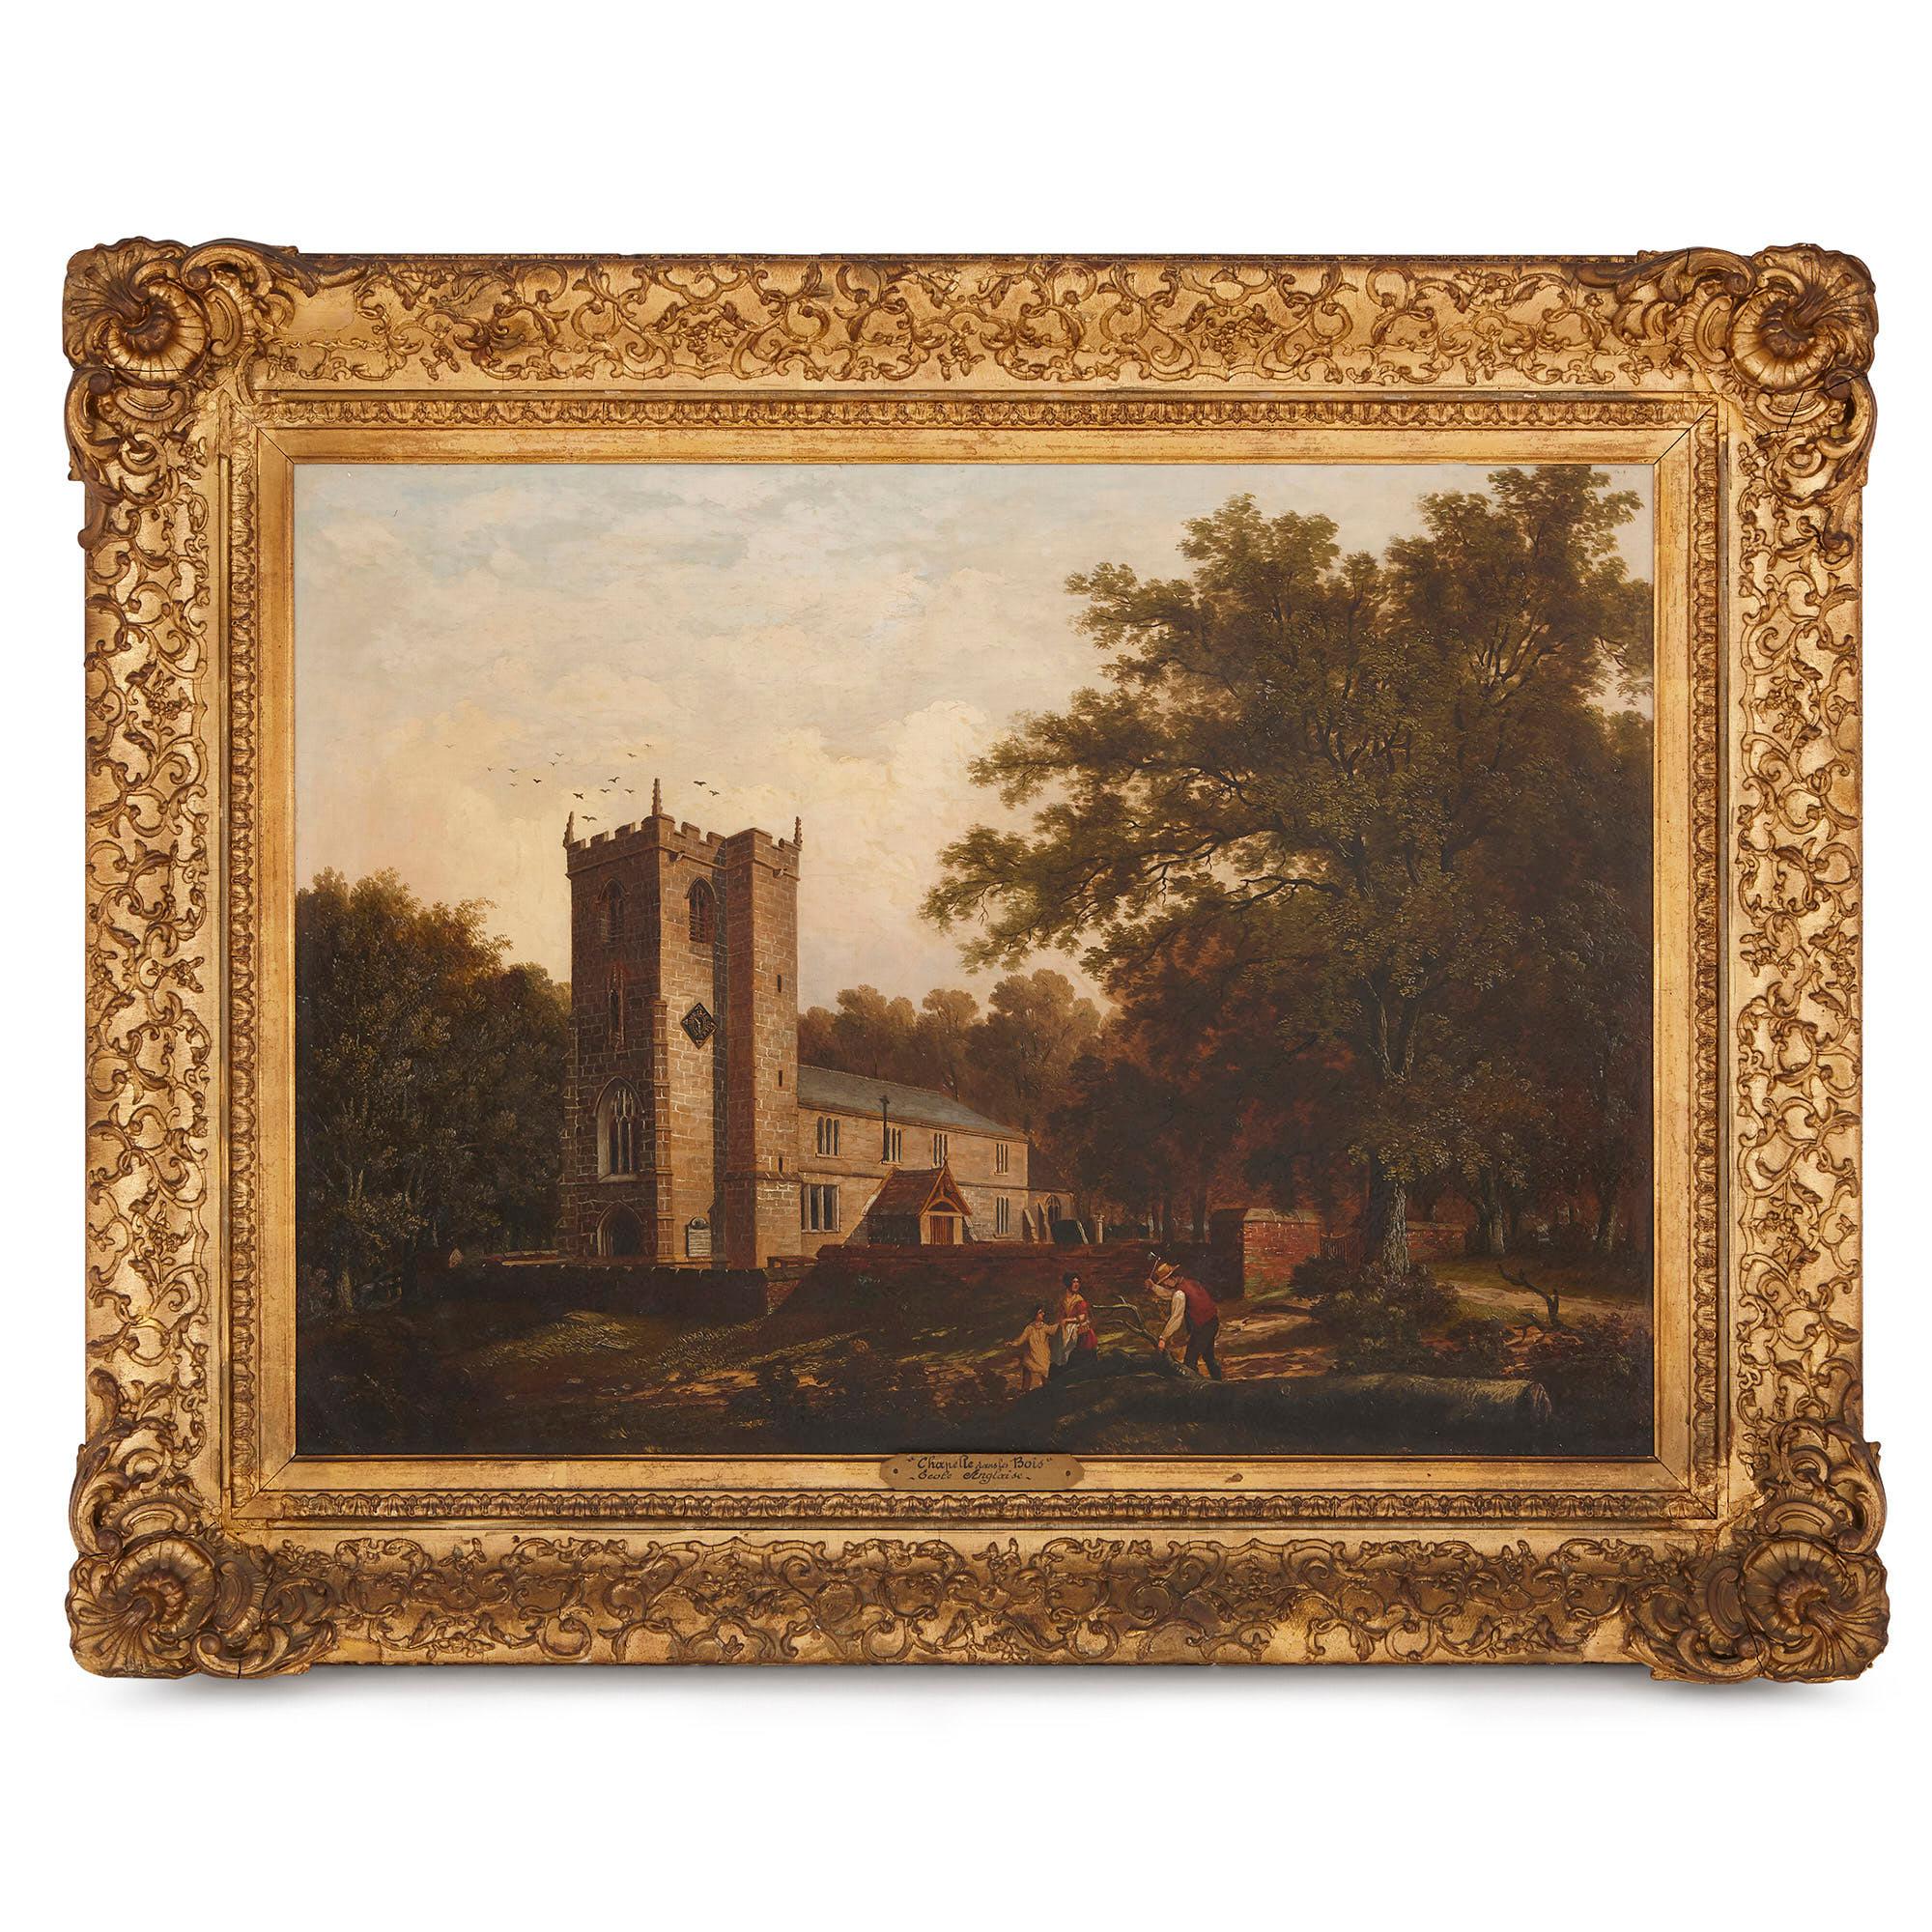 'Chapel in the Woods', oil on canvas painting by English School 